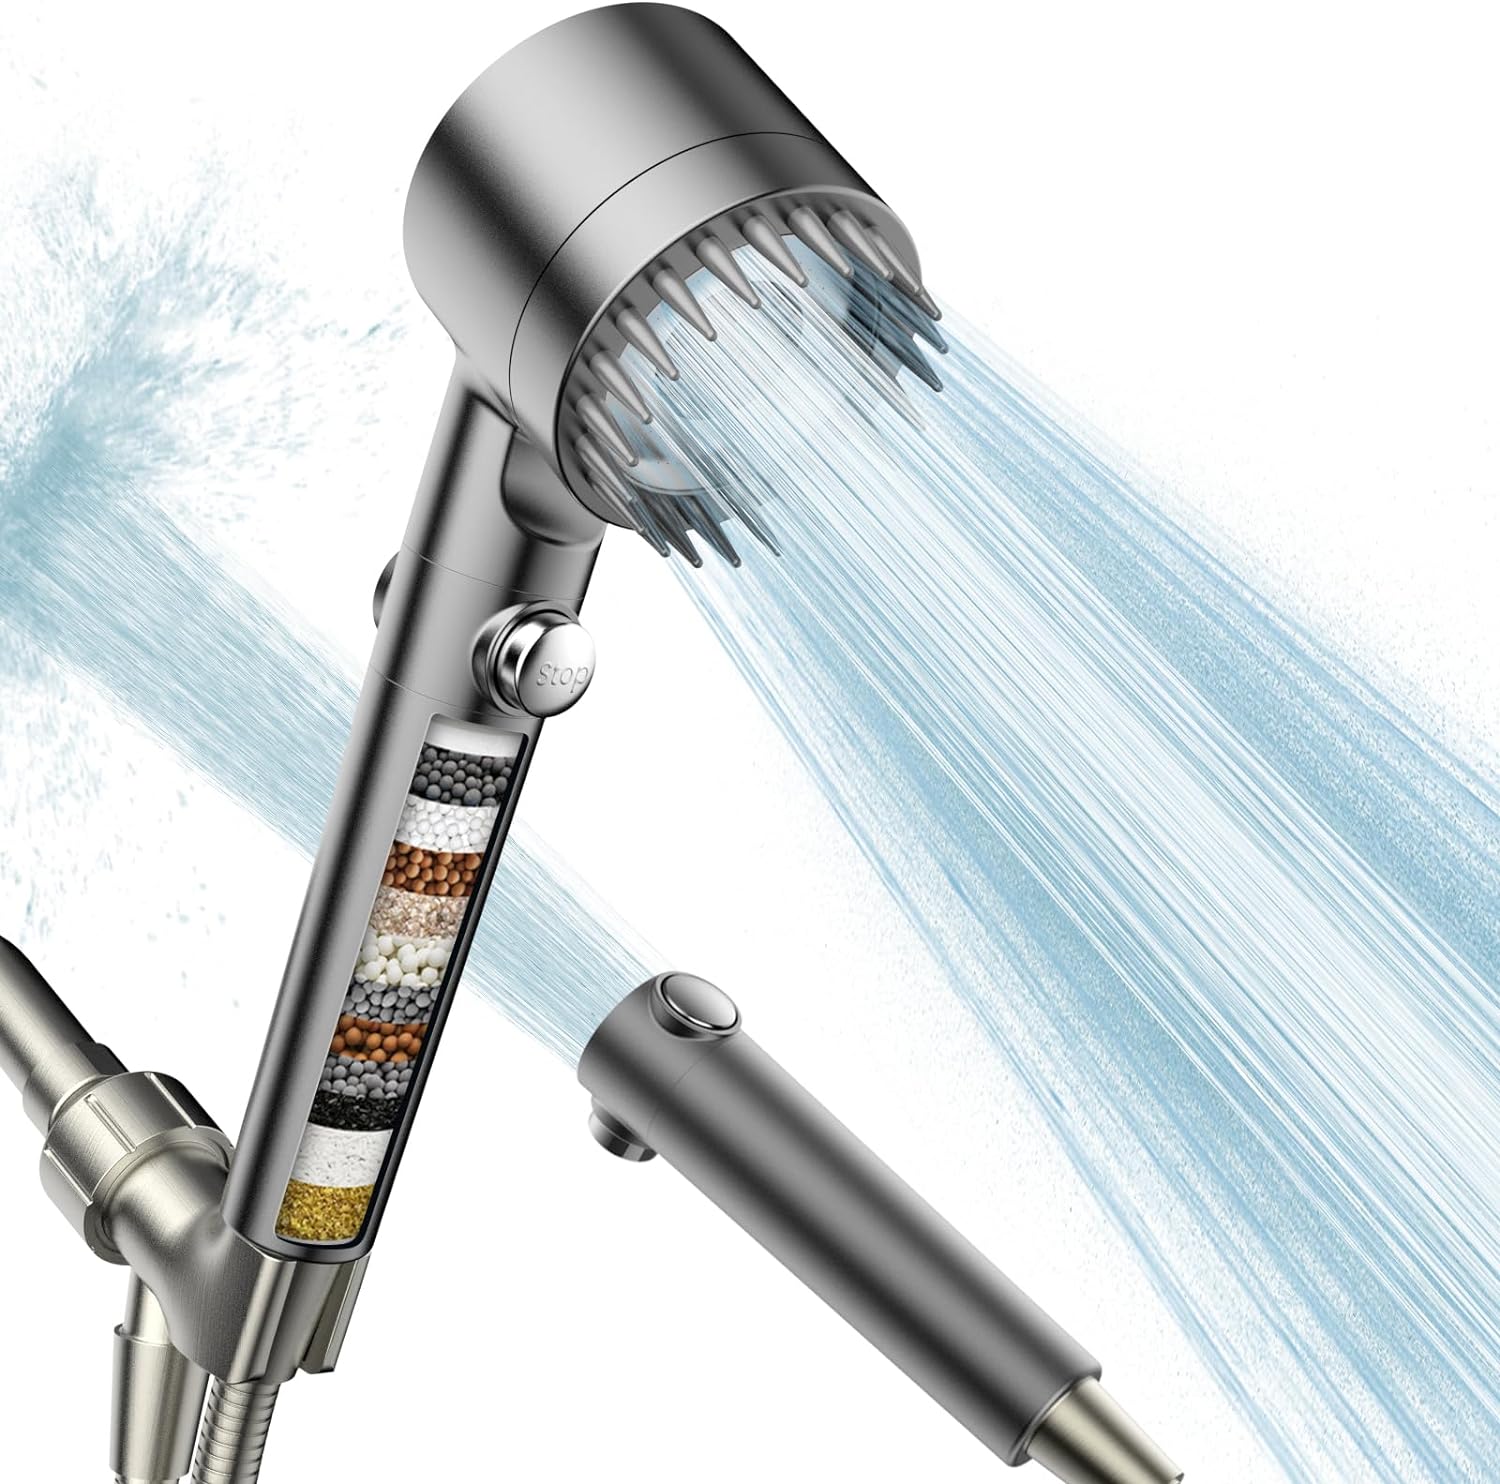 Filtered Shower Head with Handheld, High Pressure Water Flow and Multiple Spray Modes Shower Head with Filter, Power Wash for Hard Water, Showerhead with ON/OFF Switch for Pets Bath